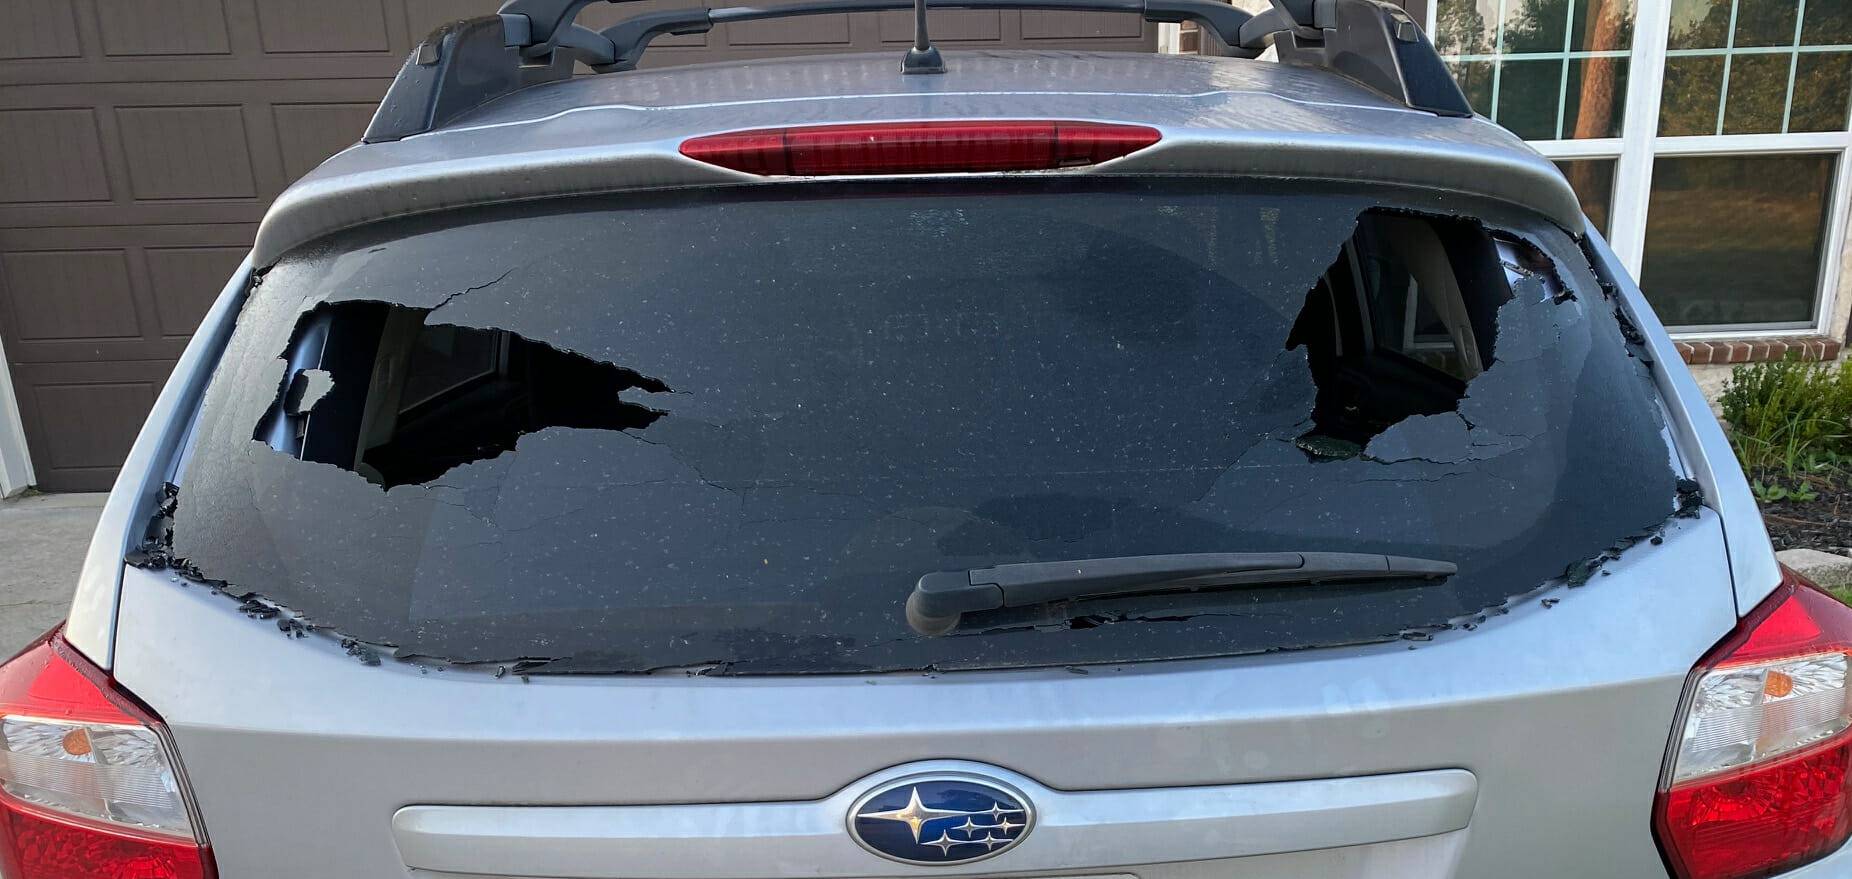 The image captures a 2018 Subaru Forester SUV parked in Lackland AFB, San Antonio, Texas. The vehicle's rear windshield, originally featuring factory privacy tint, is visibly broken as a result of vandalism. A full replacement is required and a home auto glass appointment has been scheduled to facilitate the necessary repairs and restore the vehicle's rear visibility.